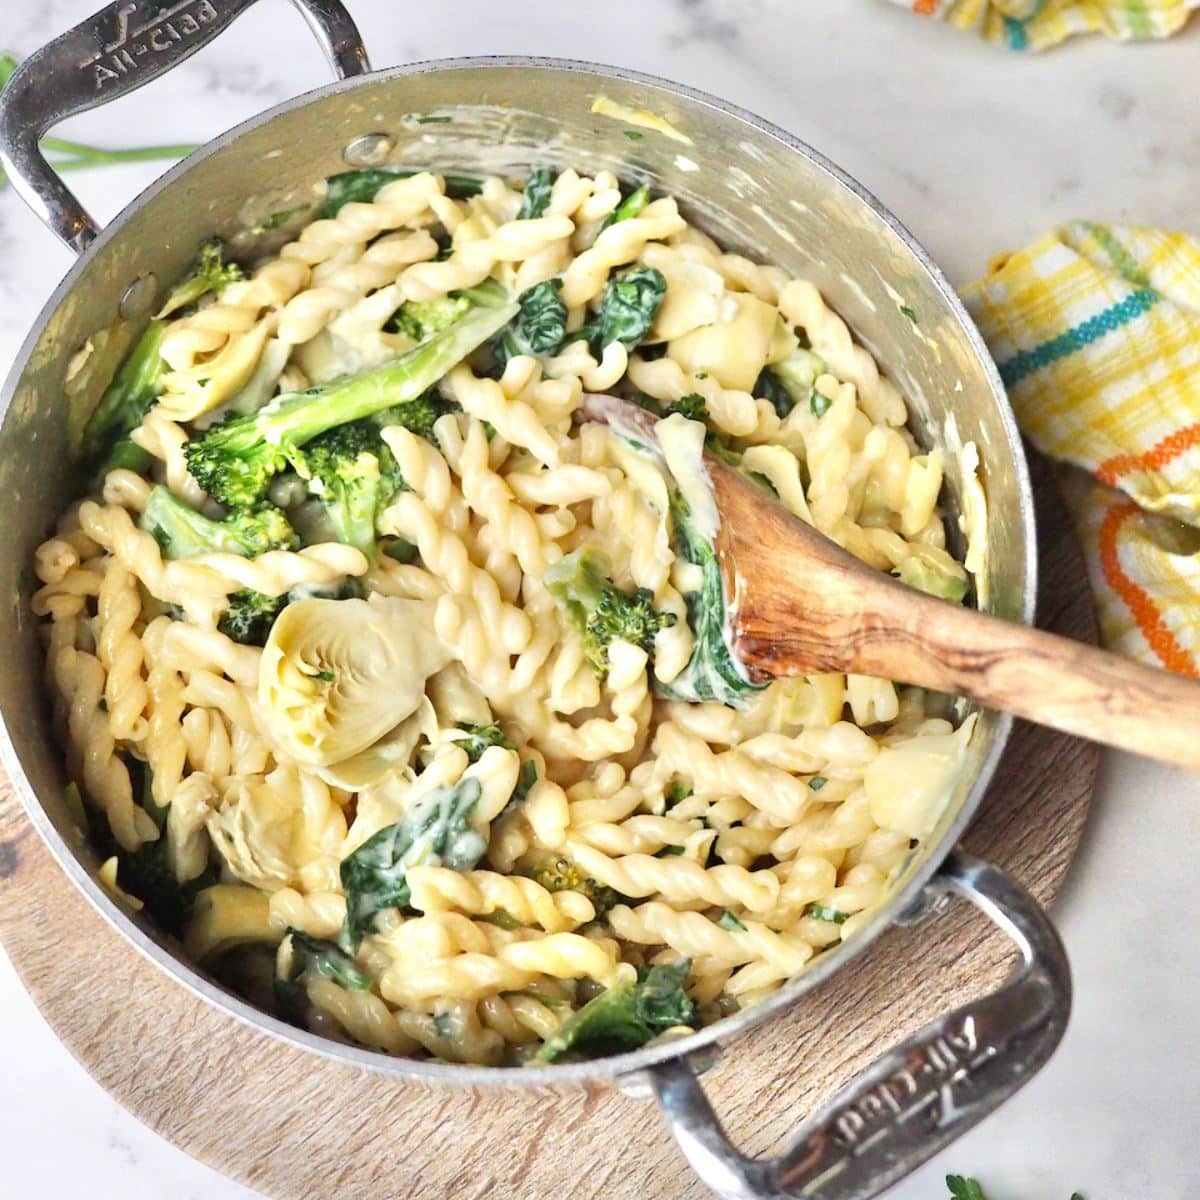 Pot filled with on pot creamy garlic lemon pasta recipe with wooden spoon to serve.